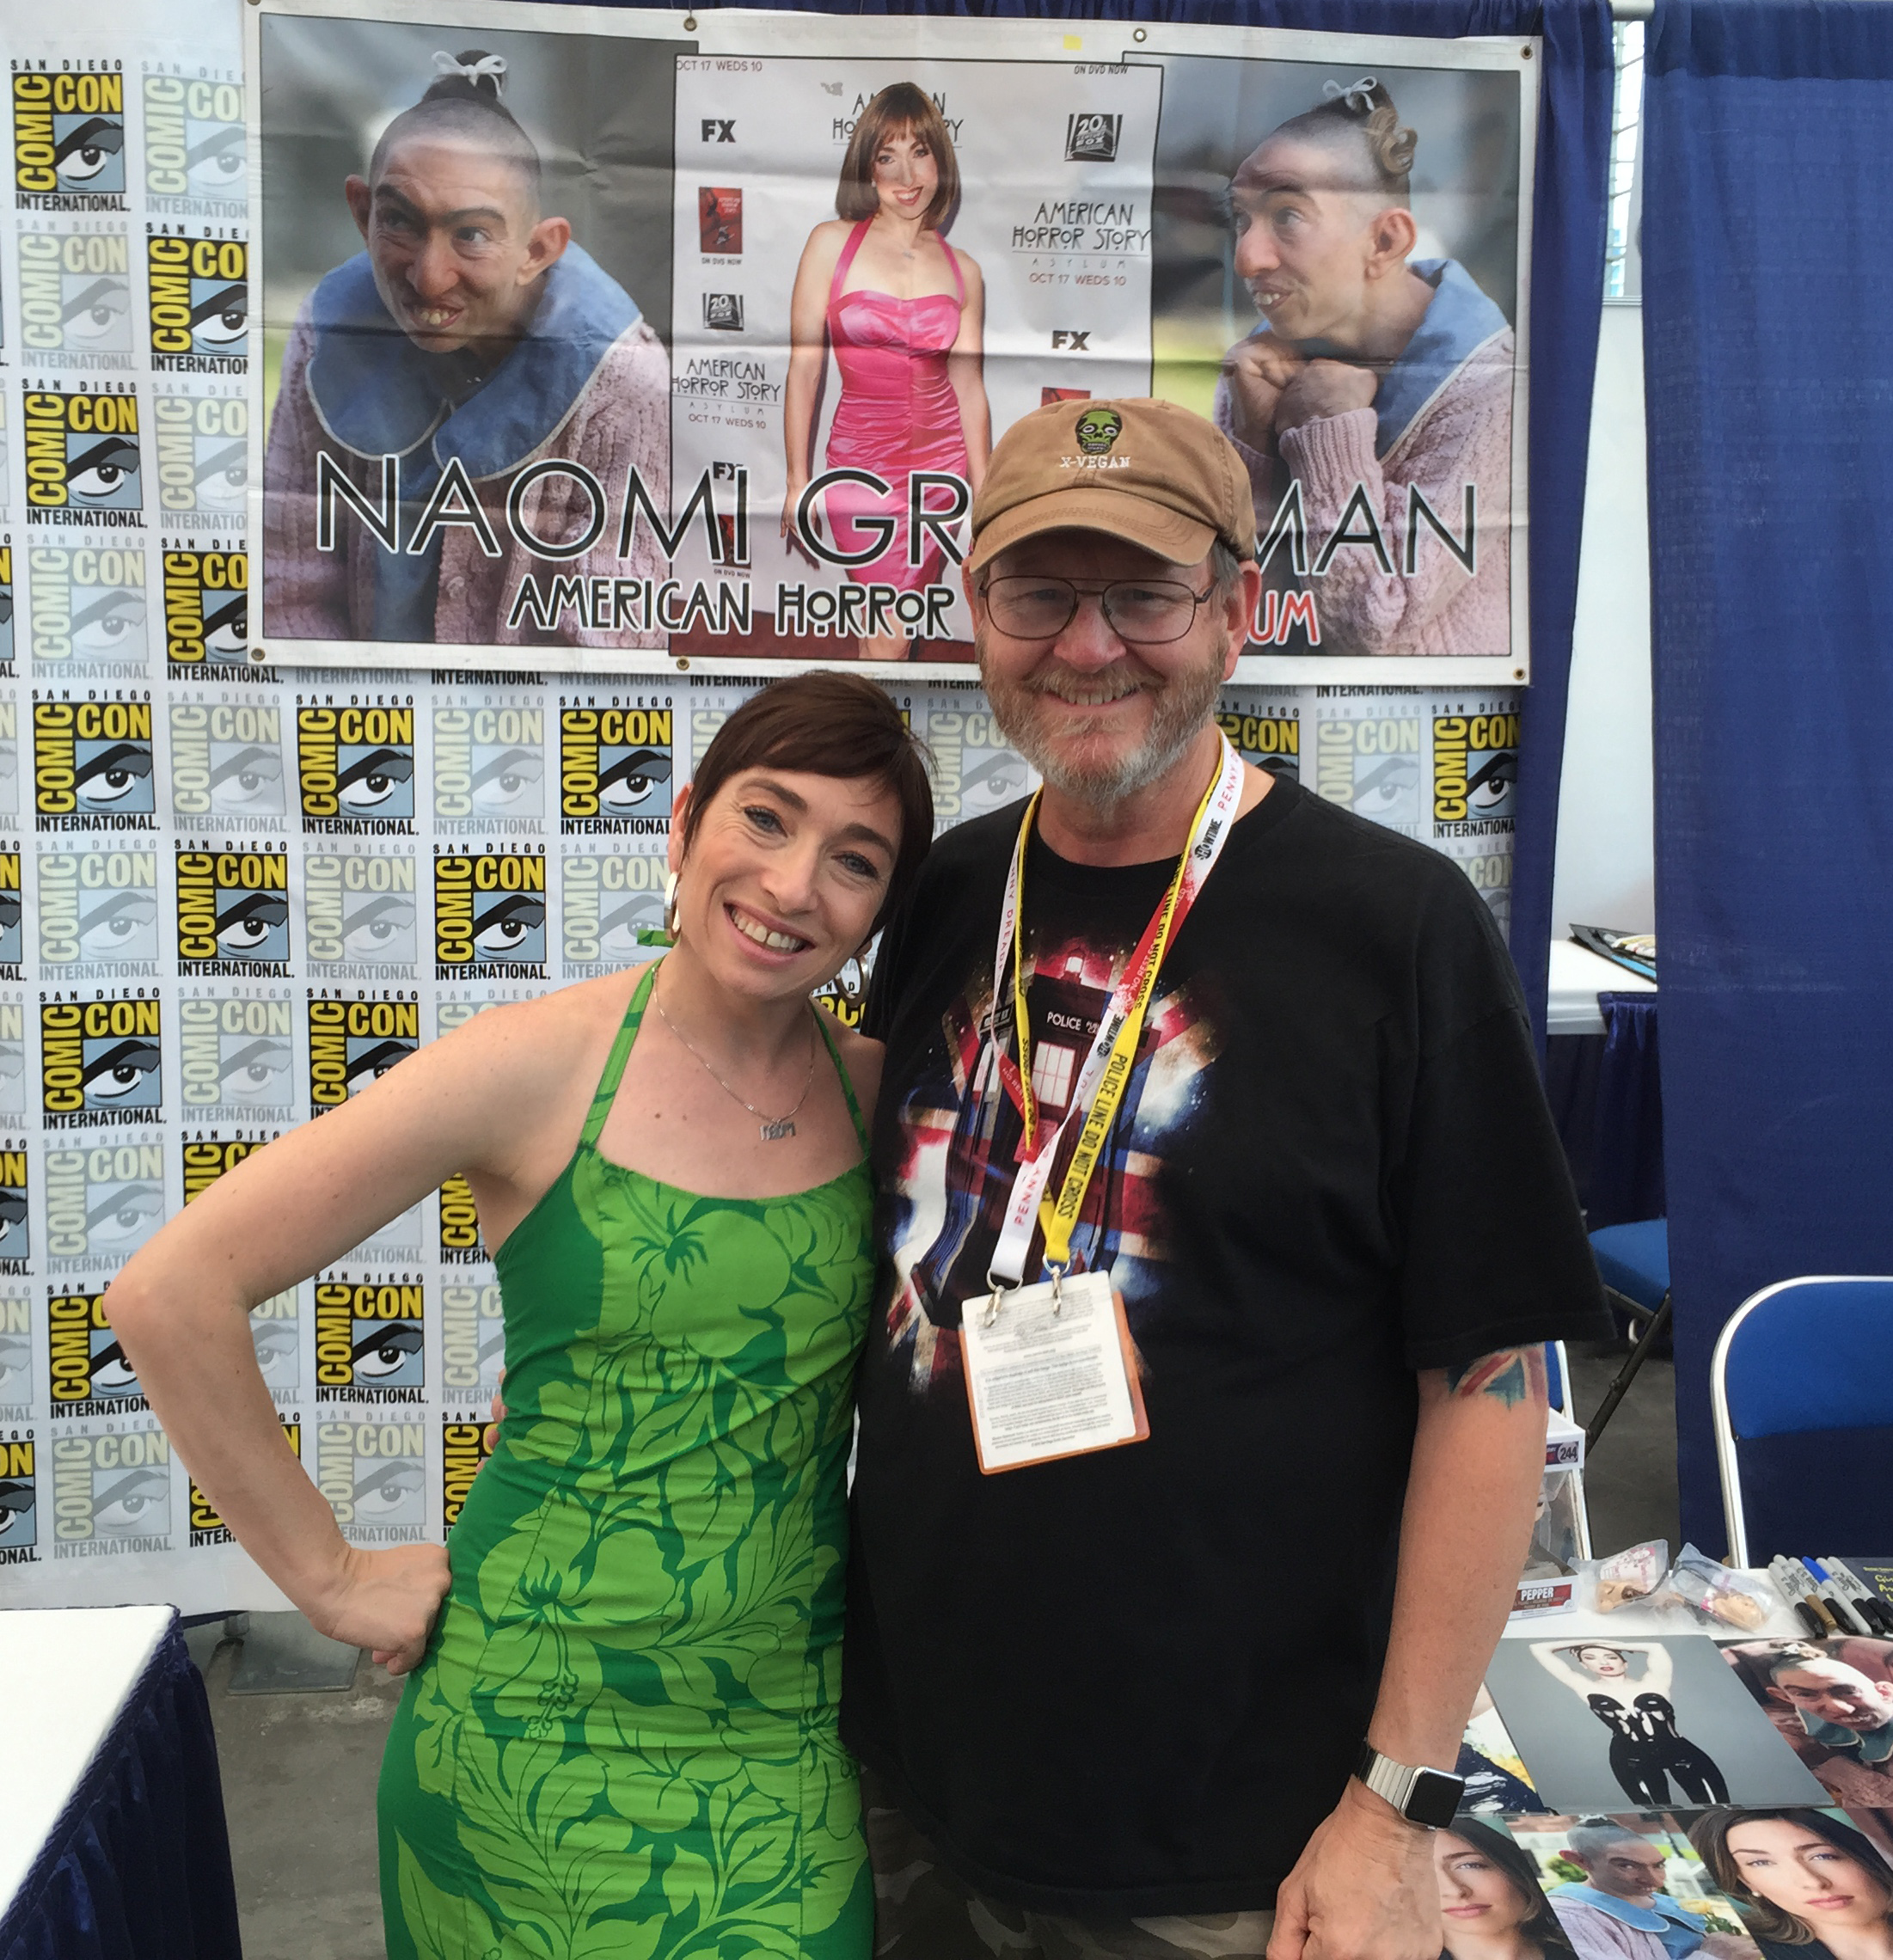 Gregory Schmauss with Naomi Grossman (American Horror Story) at the 2015 San Diego Comic-Con.